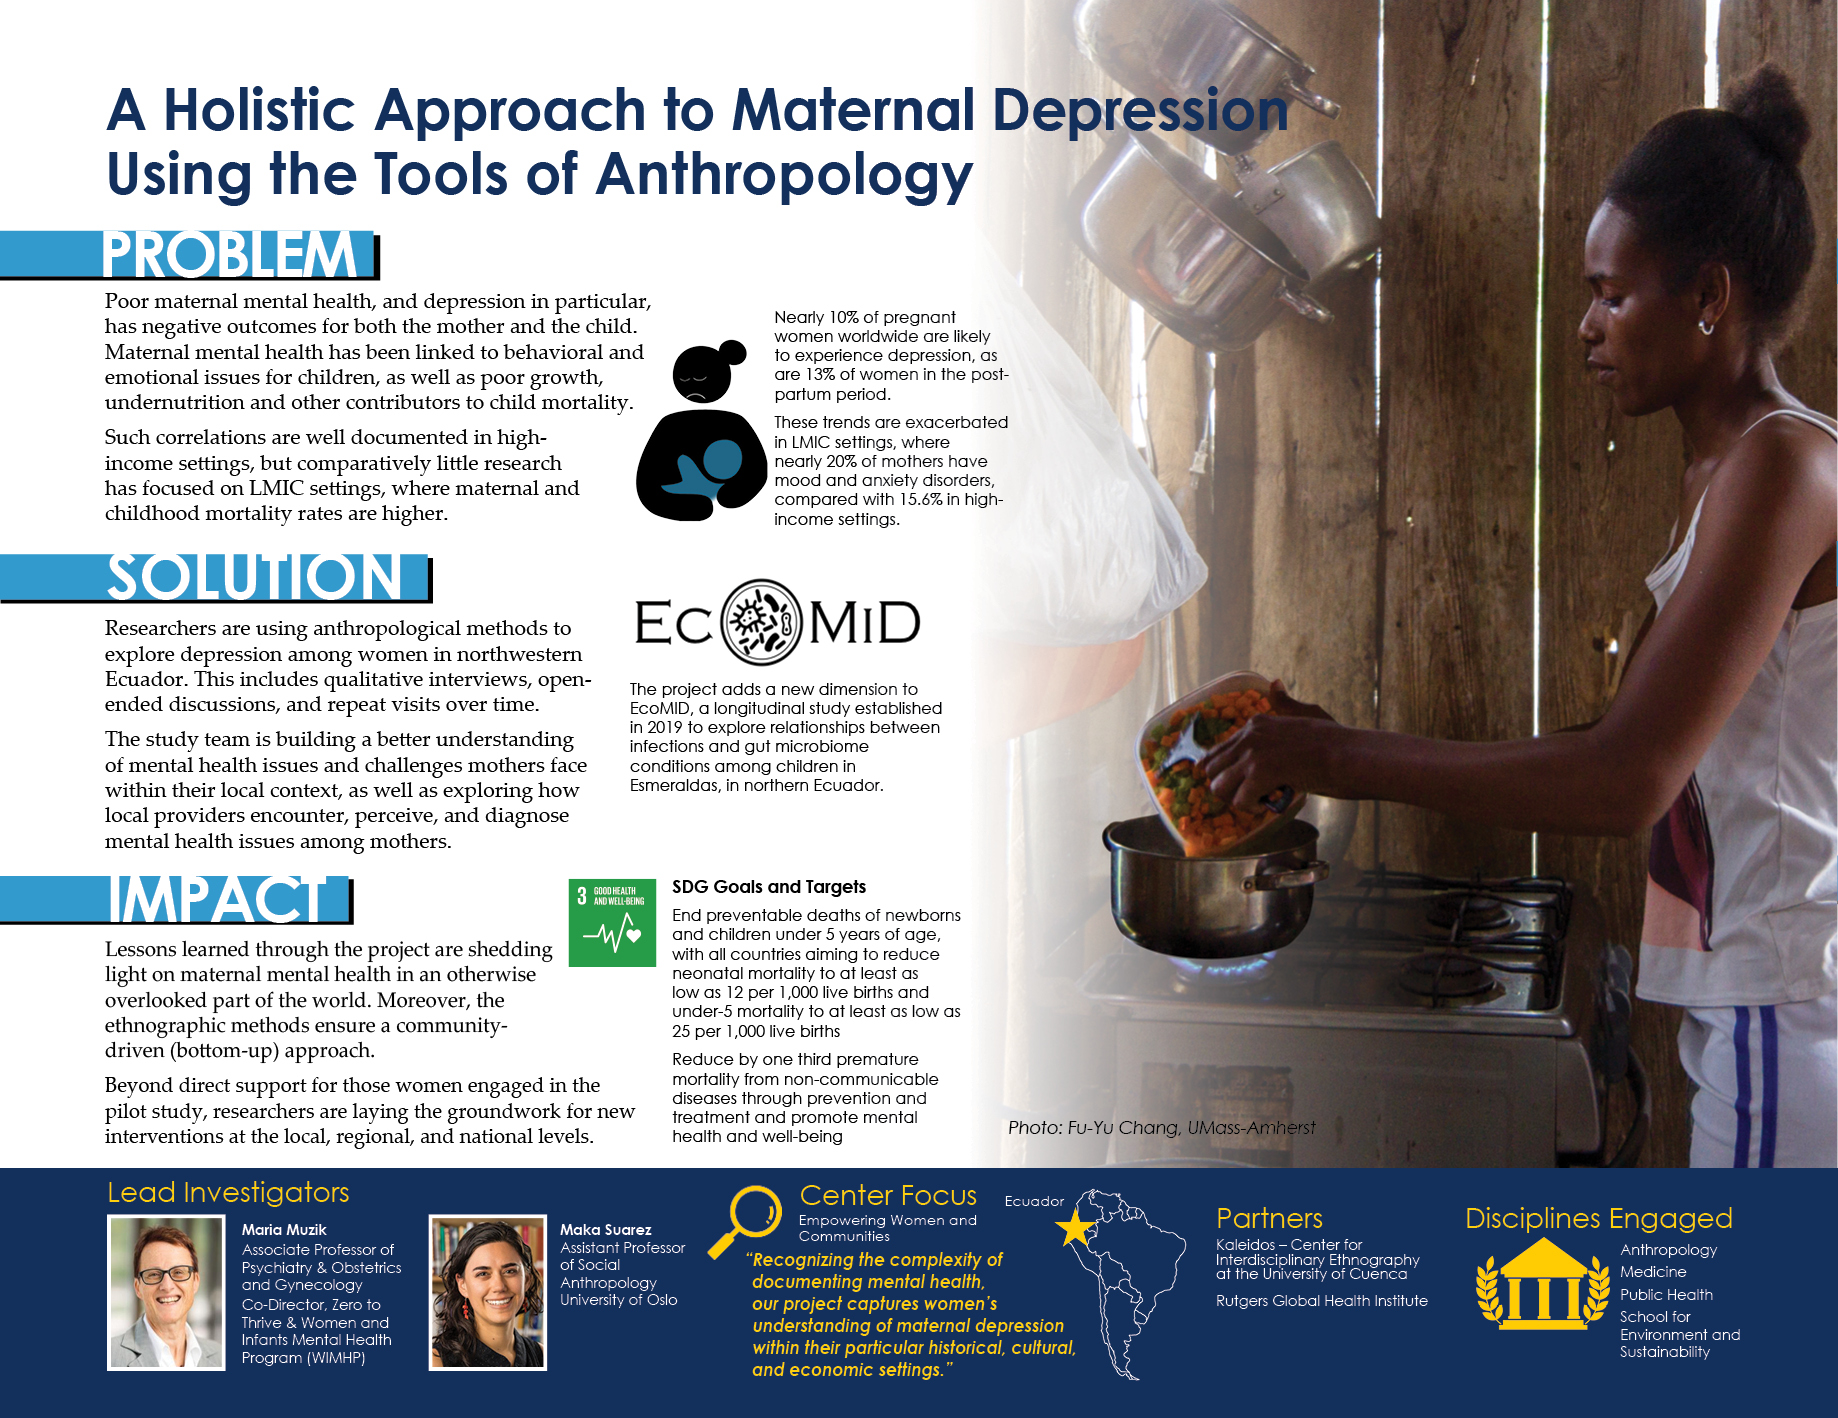 A Holistic Approach to Maternal Depression Using the Tools of Anthropology